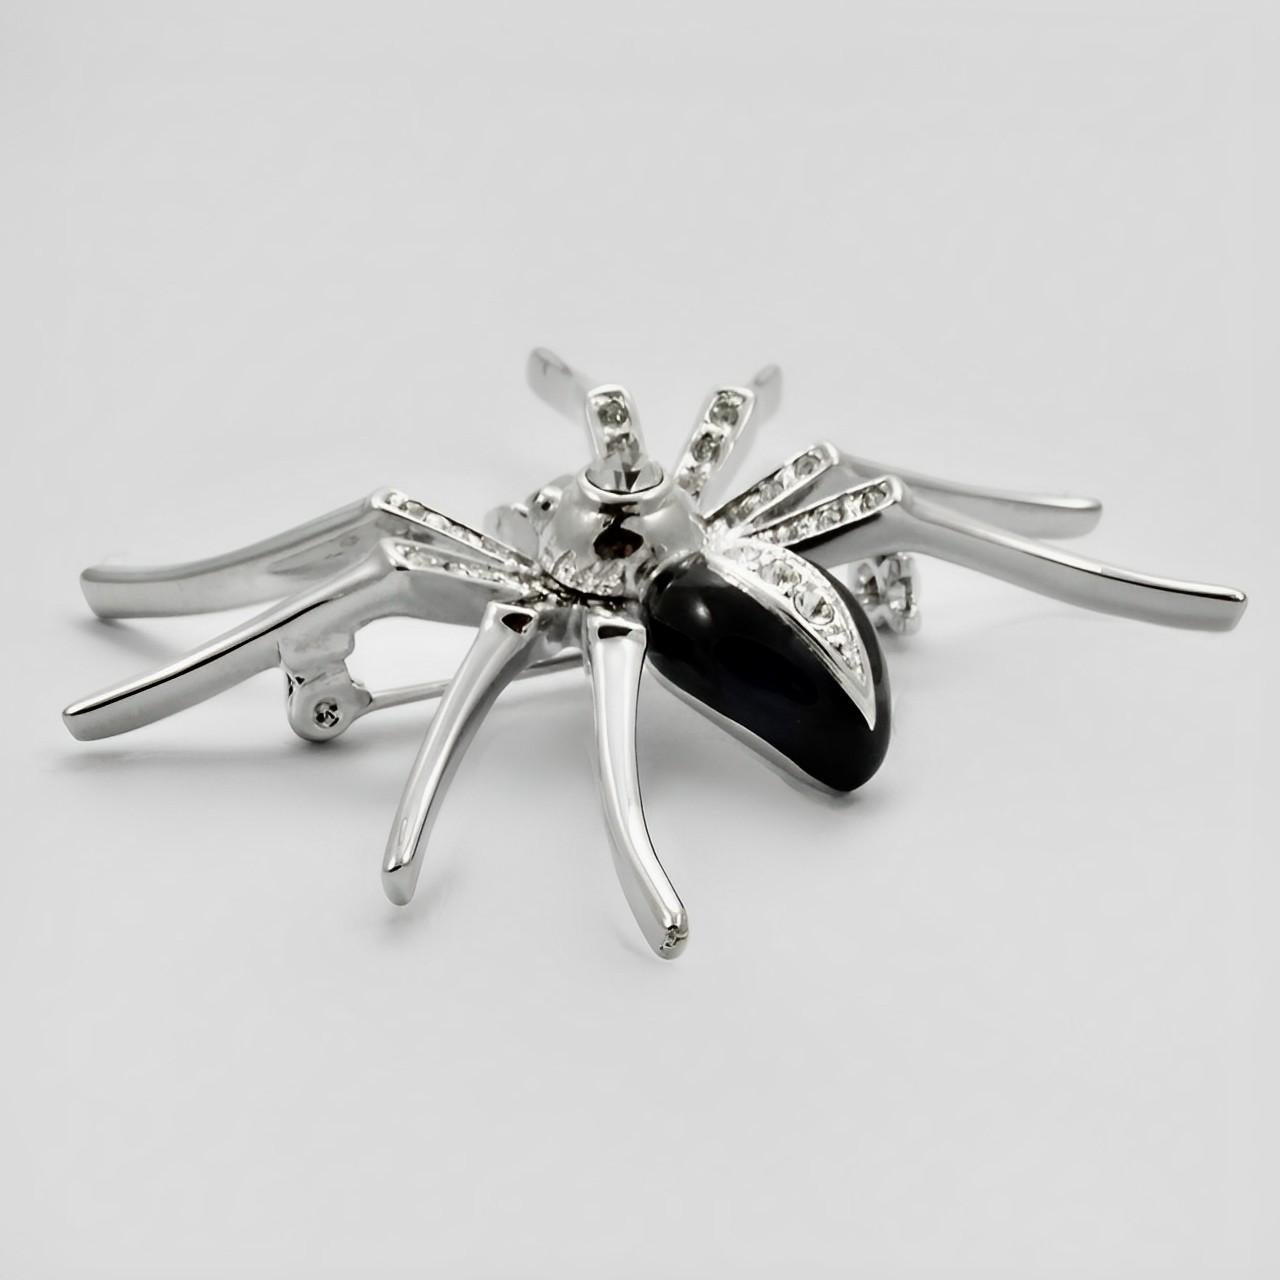 Women's or Men's Silver Plated Clear Rhinestone and Black Enamel Spider Brooch